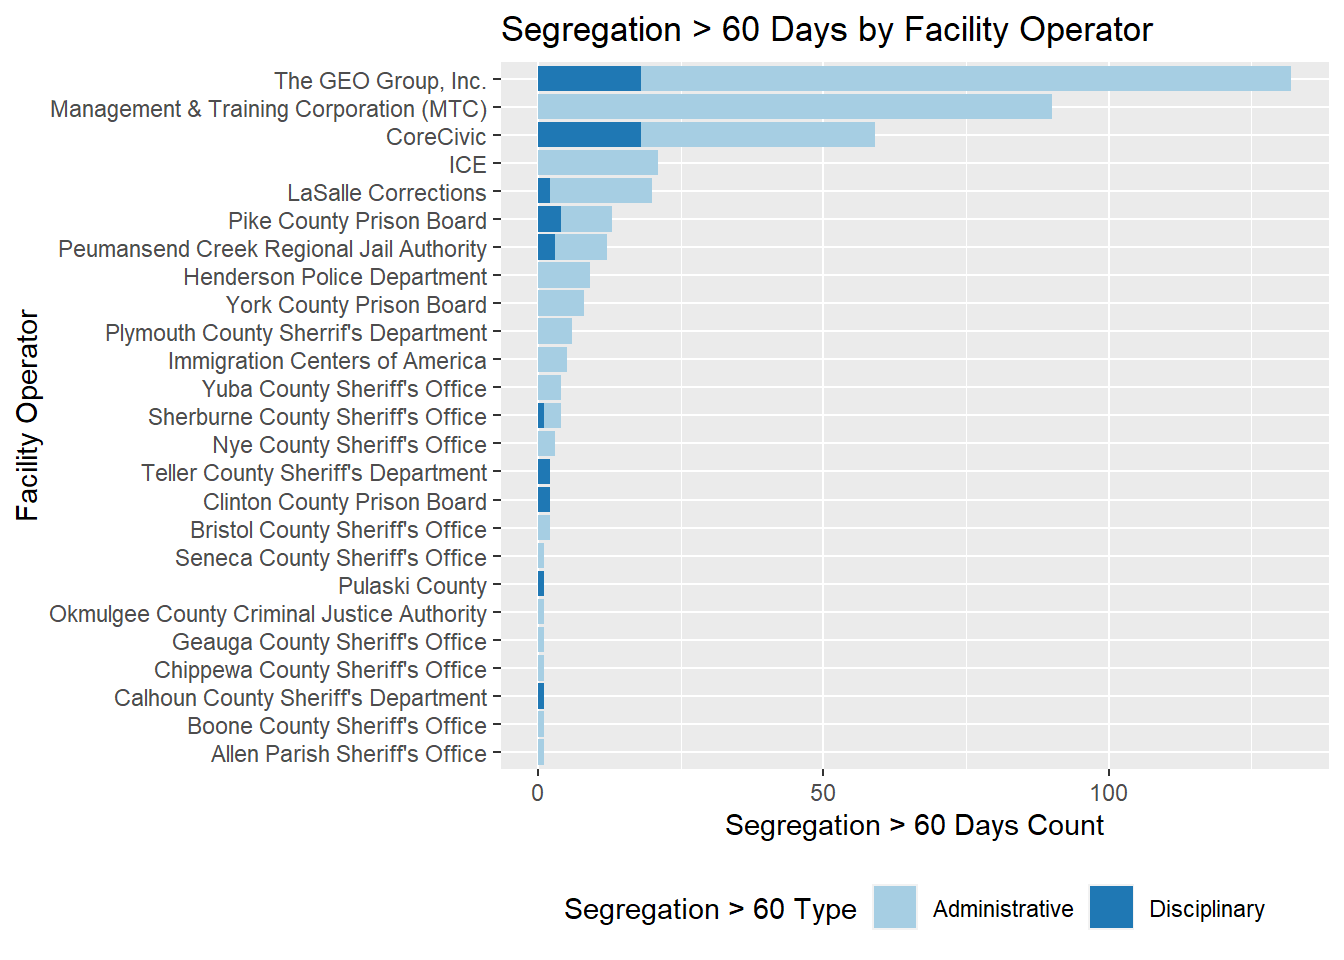 Bar plot of solitary > 60 days by facility operator